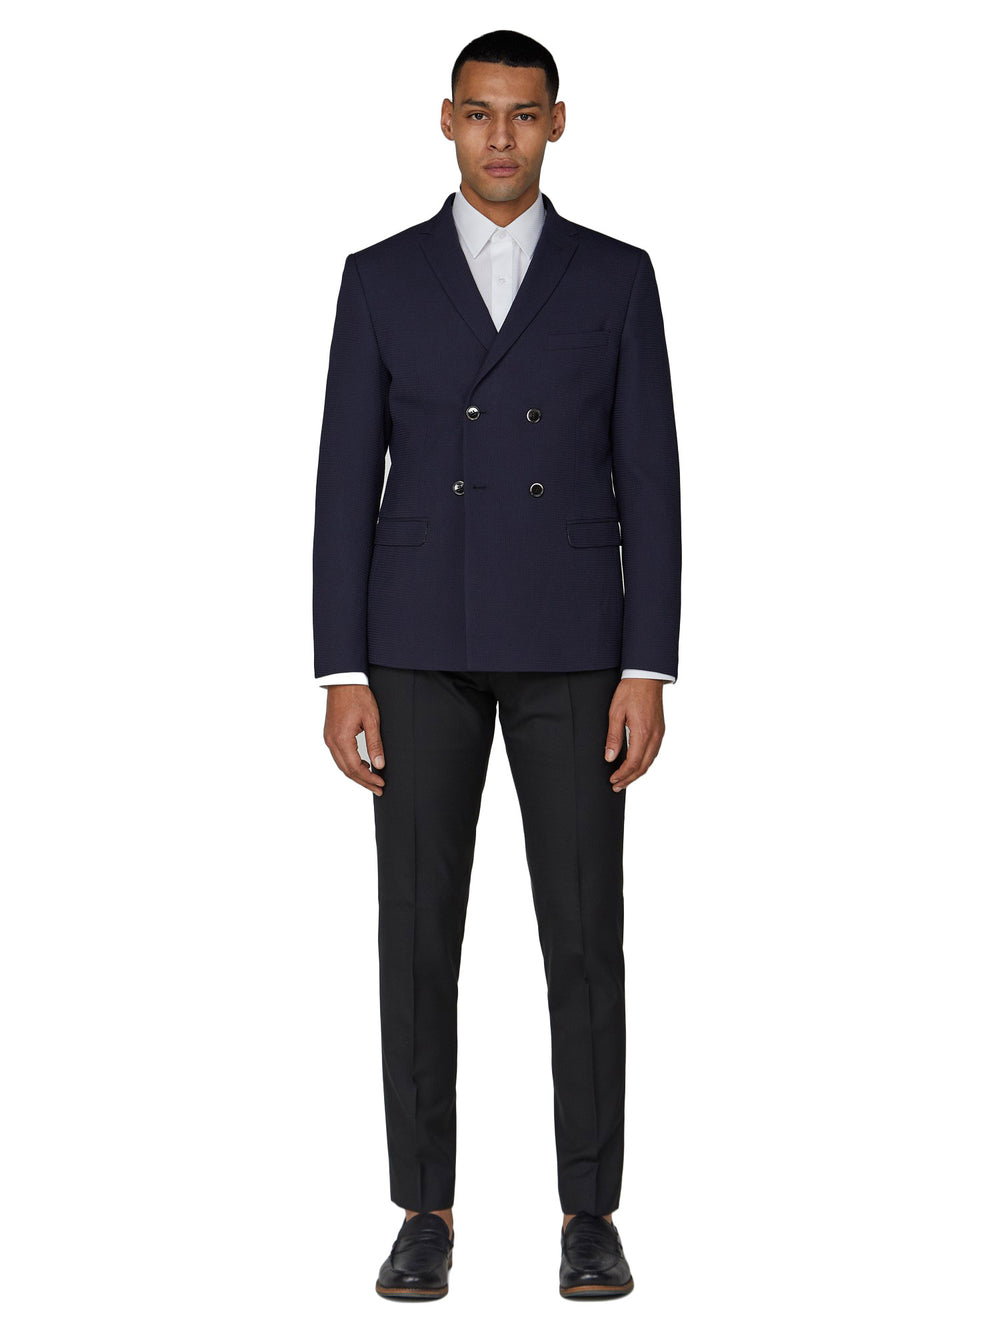 Texture Double-Breasted Suit Jacket - Navy - Ben Sherman